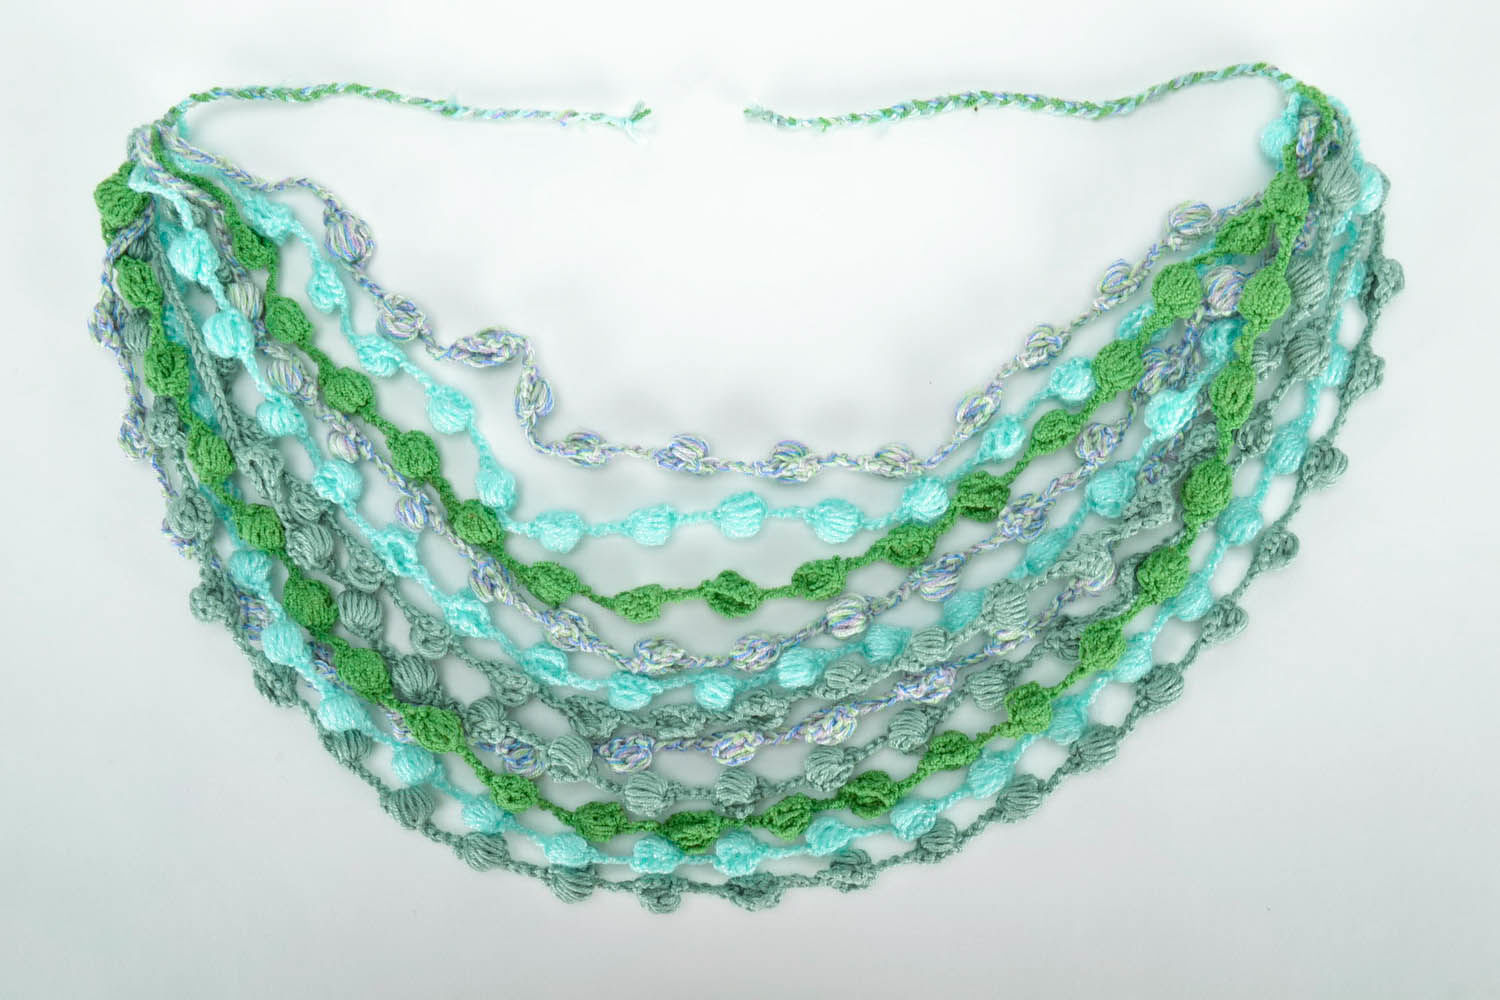 Crocheted bead necklace photo 3